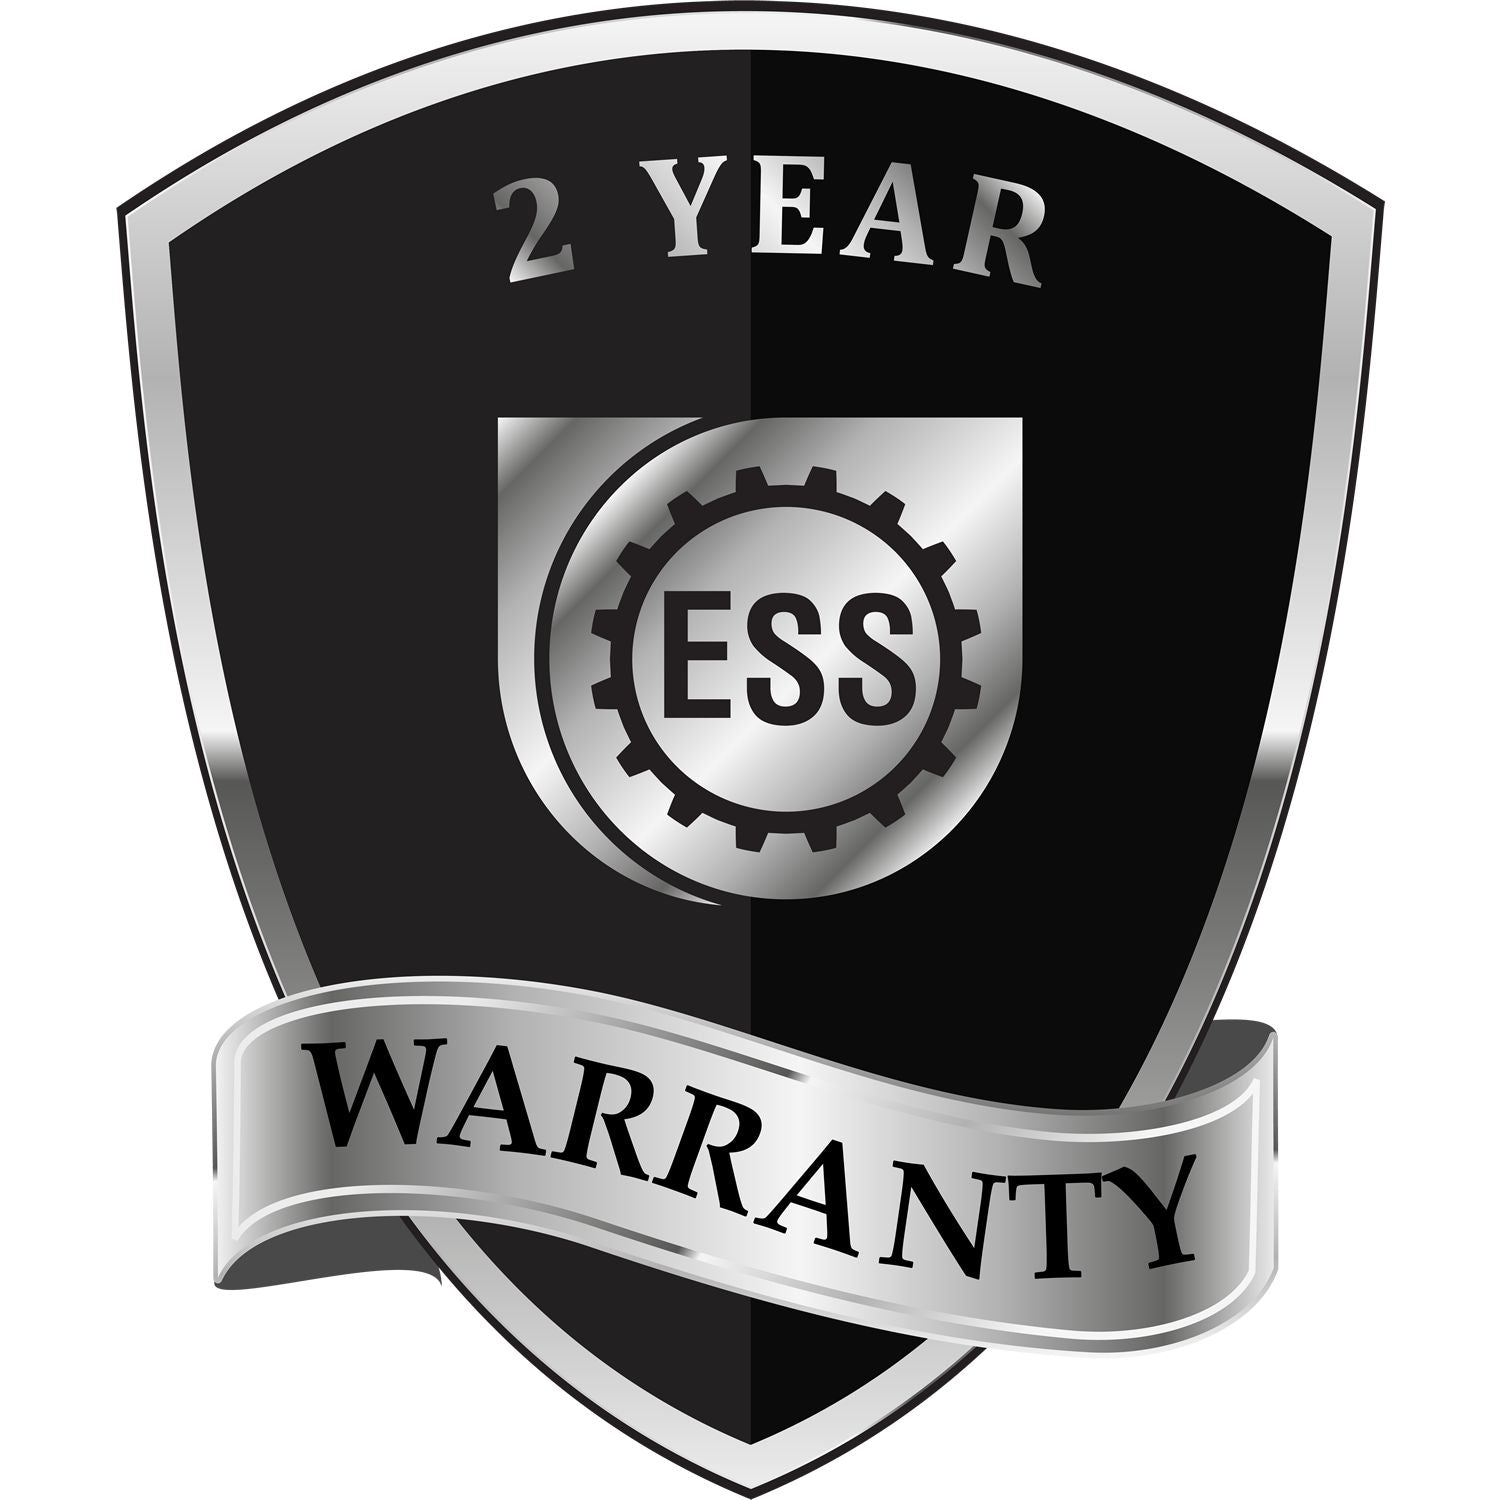 A badge or emblem showing a warranty icon for the State of Oregon Extended Long Reach Engineer Seal